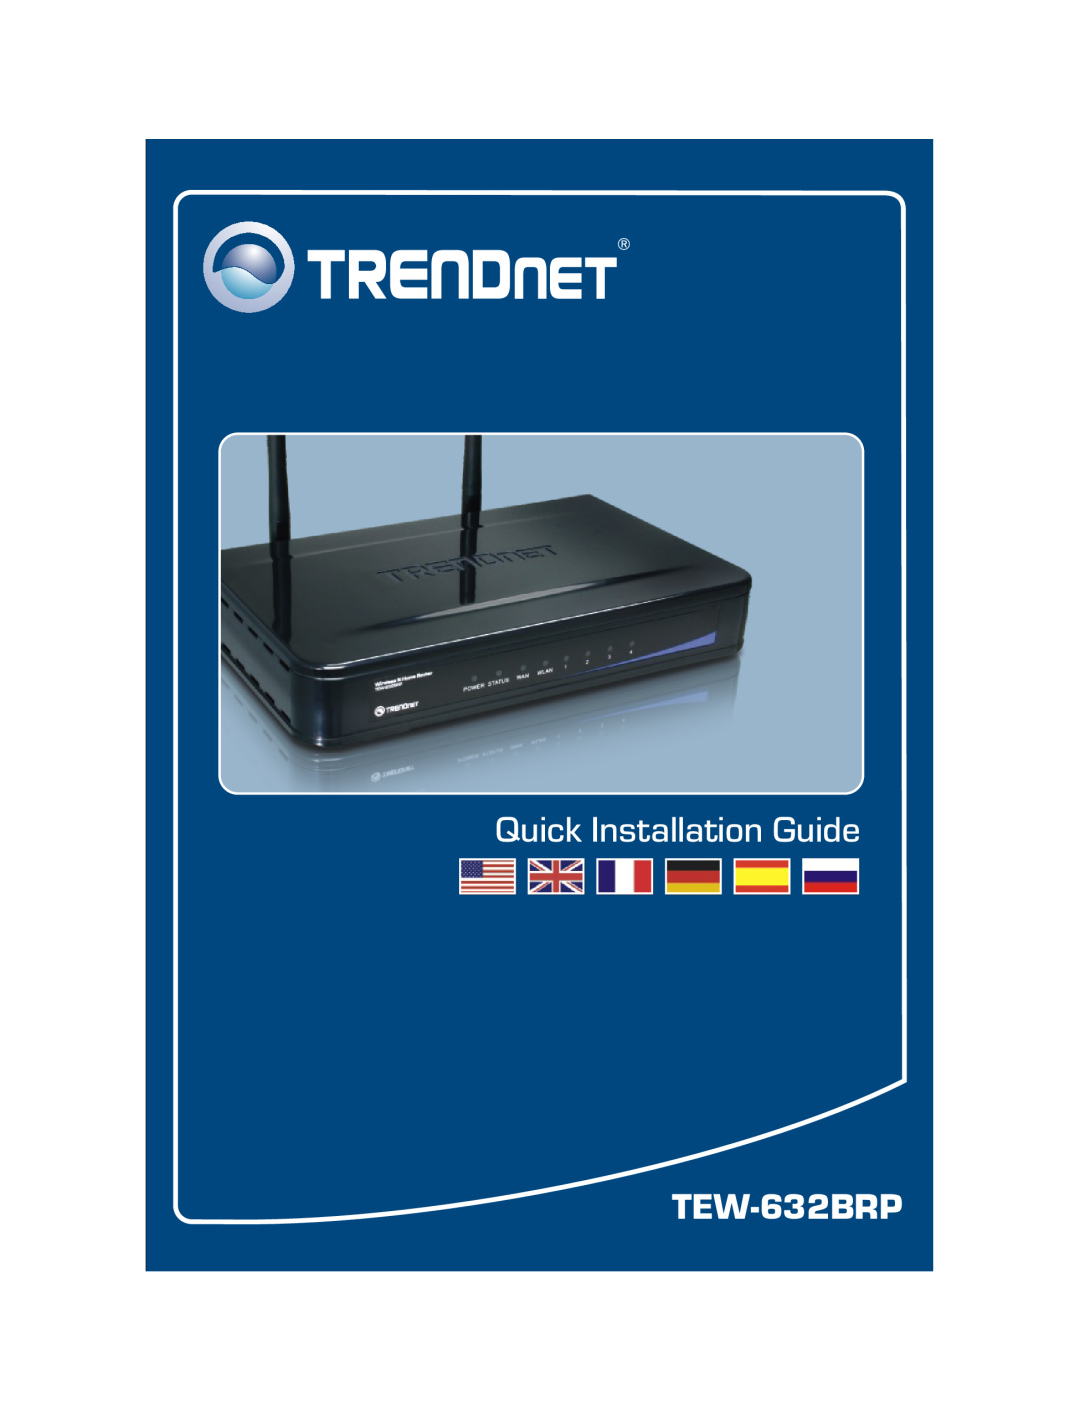 TRENDnet TEW-632BRP manual Quick Installation Guide 